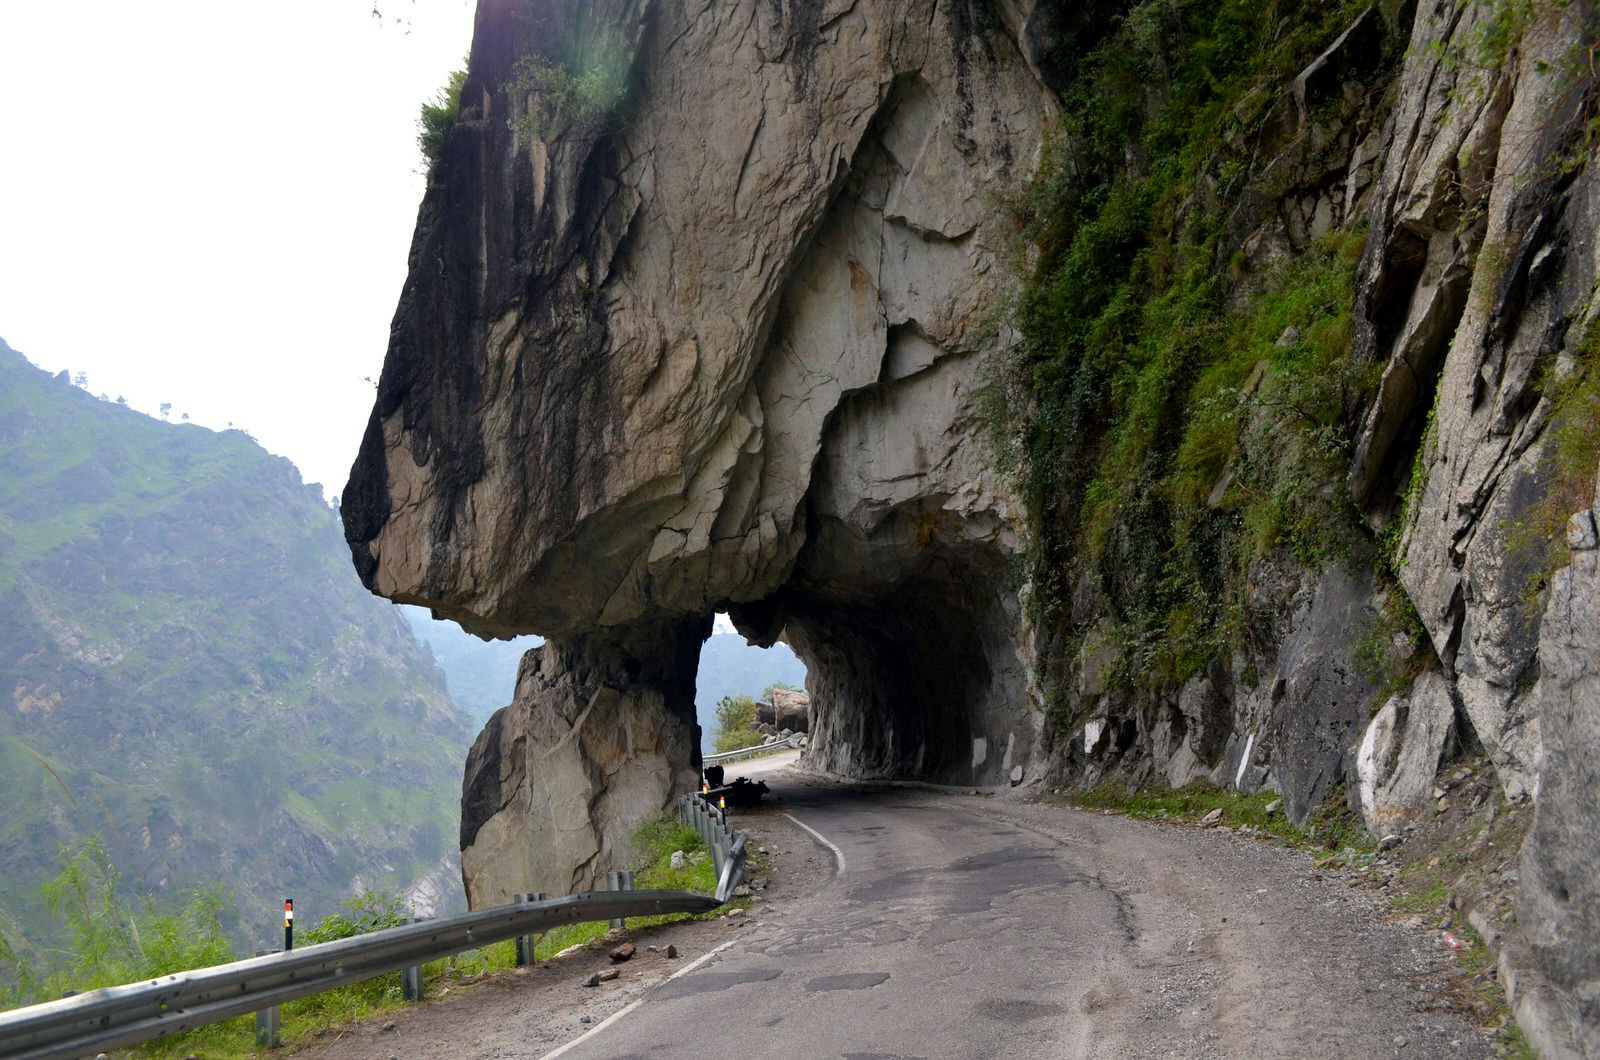 Tunnel on the rocky mountain road to Spiti in Himachal Pradesh